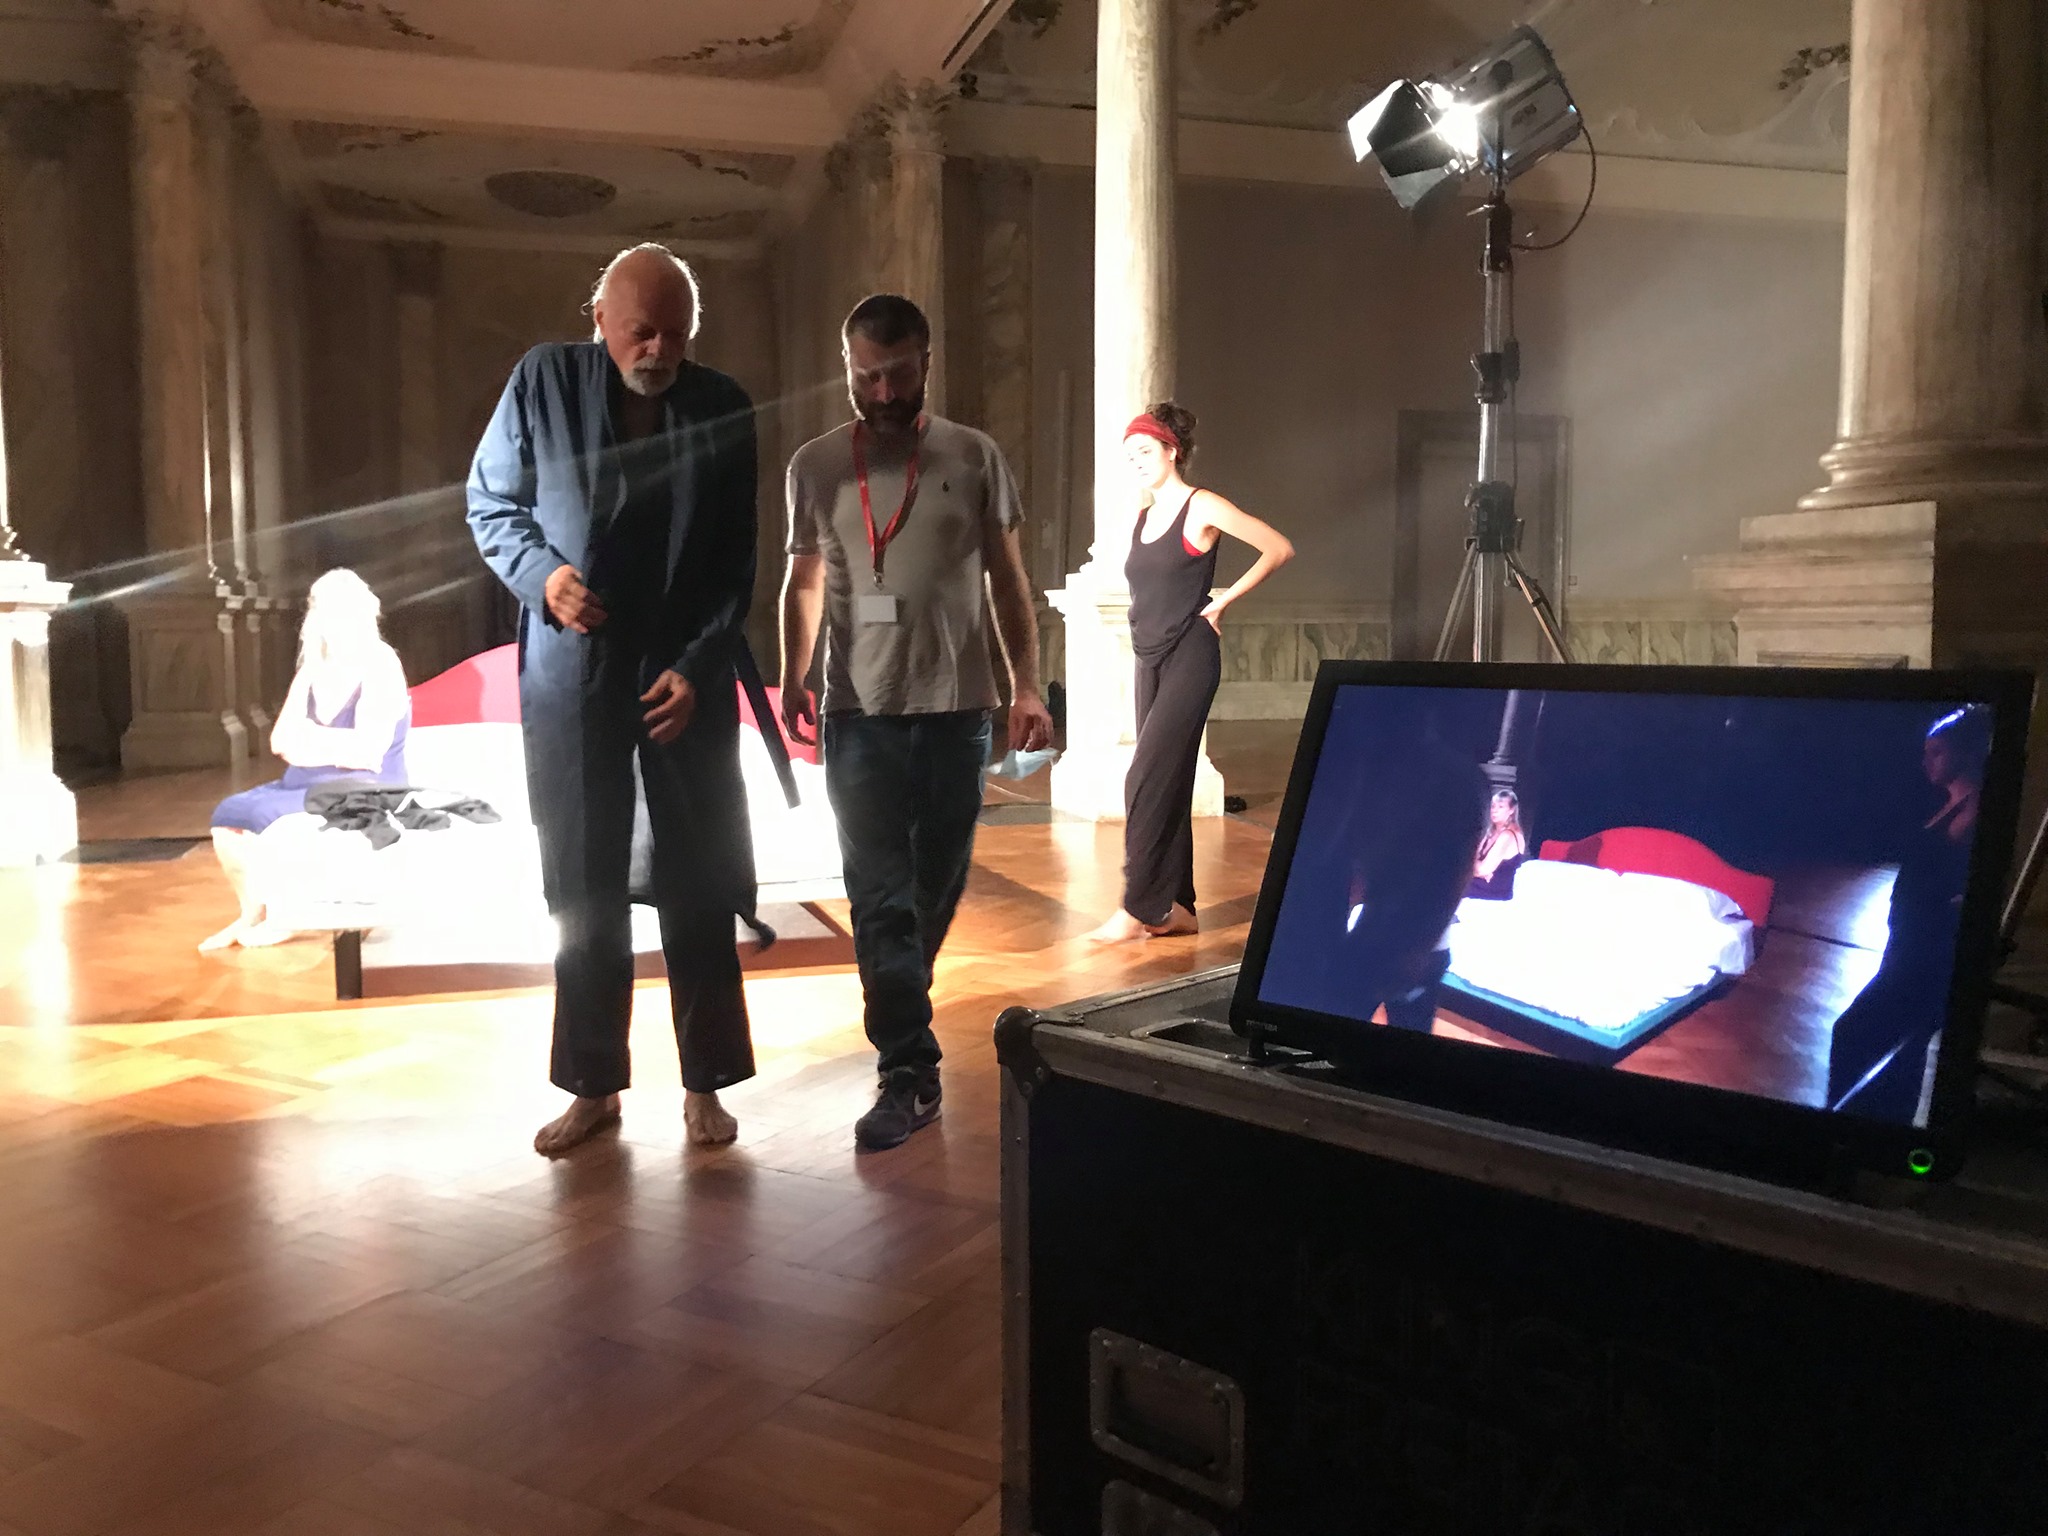 A monitor shows video of a scene while creative professionals work on set for The Right Way in the background.